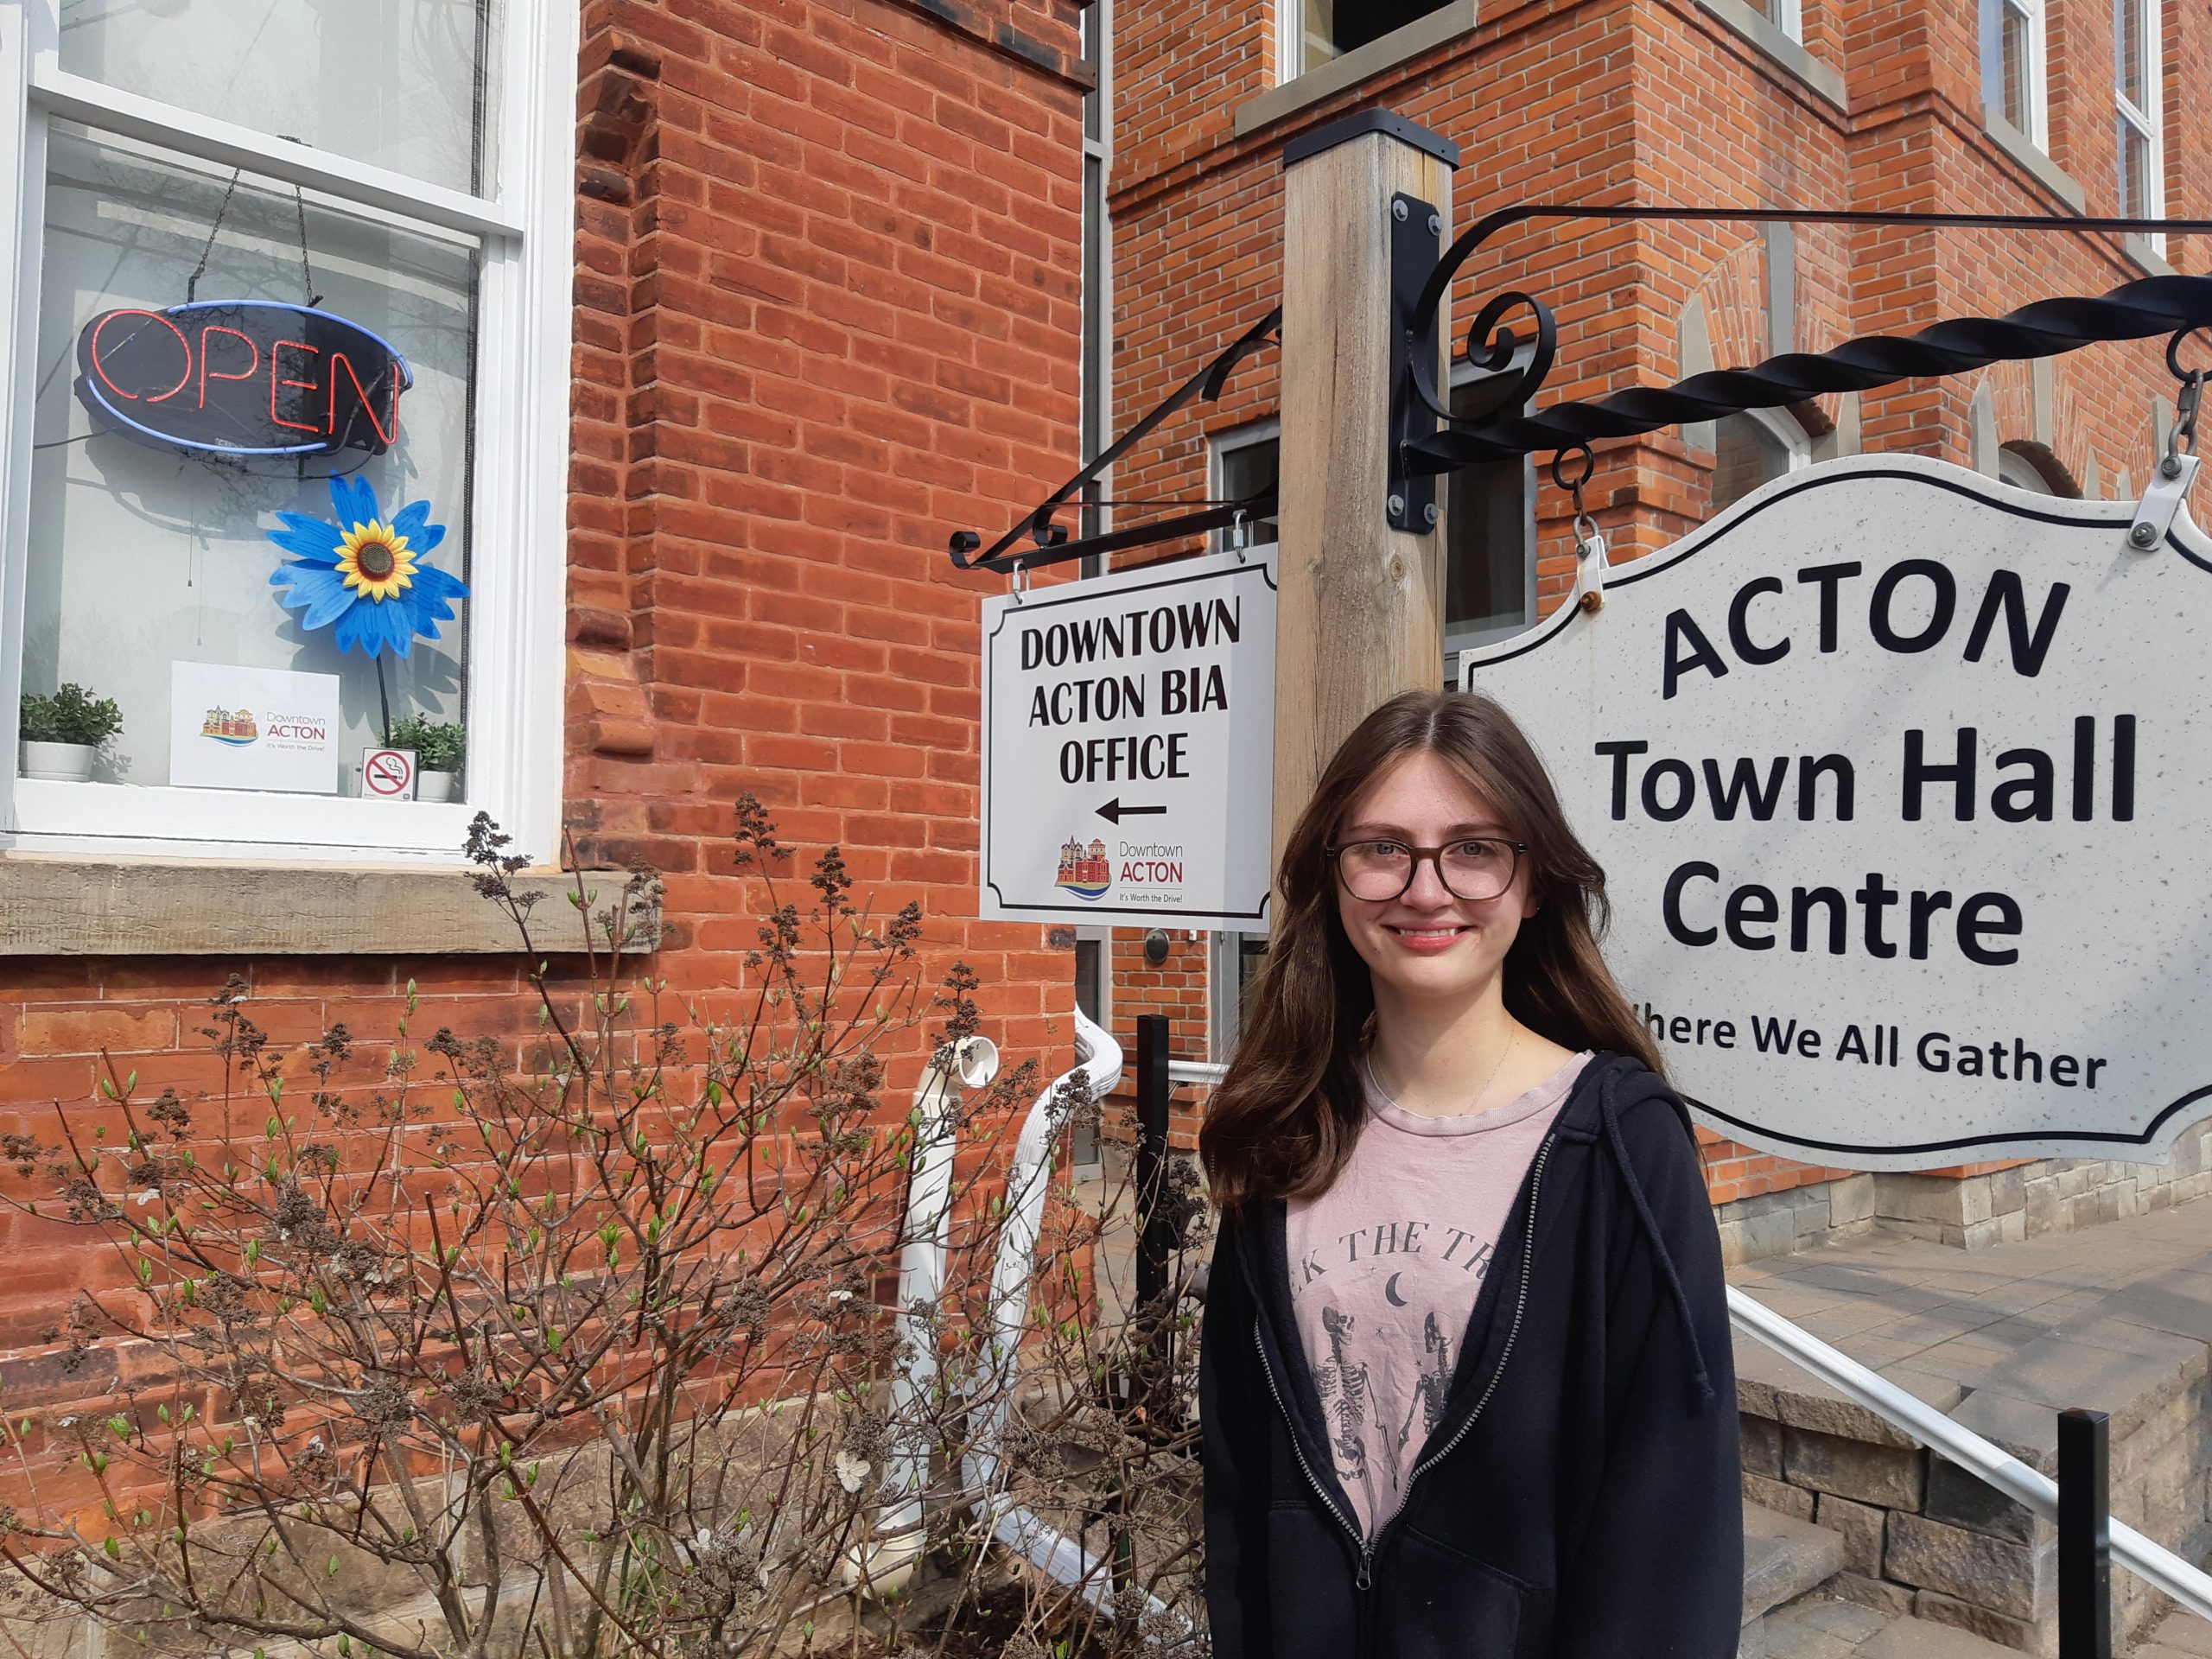 Please welcome Hannah Warden to the Acton BIA